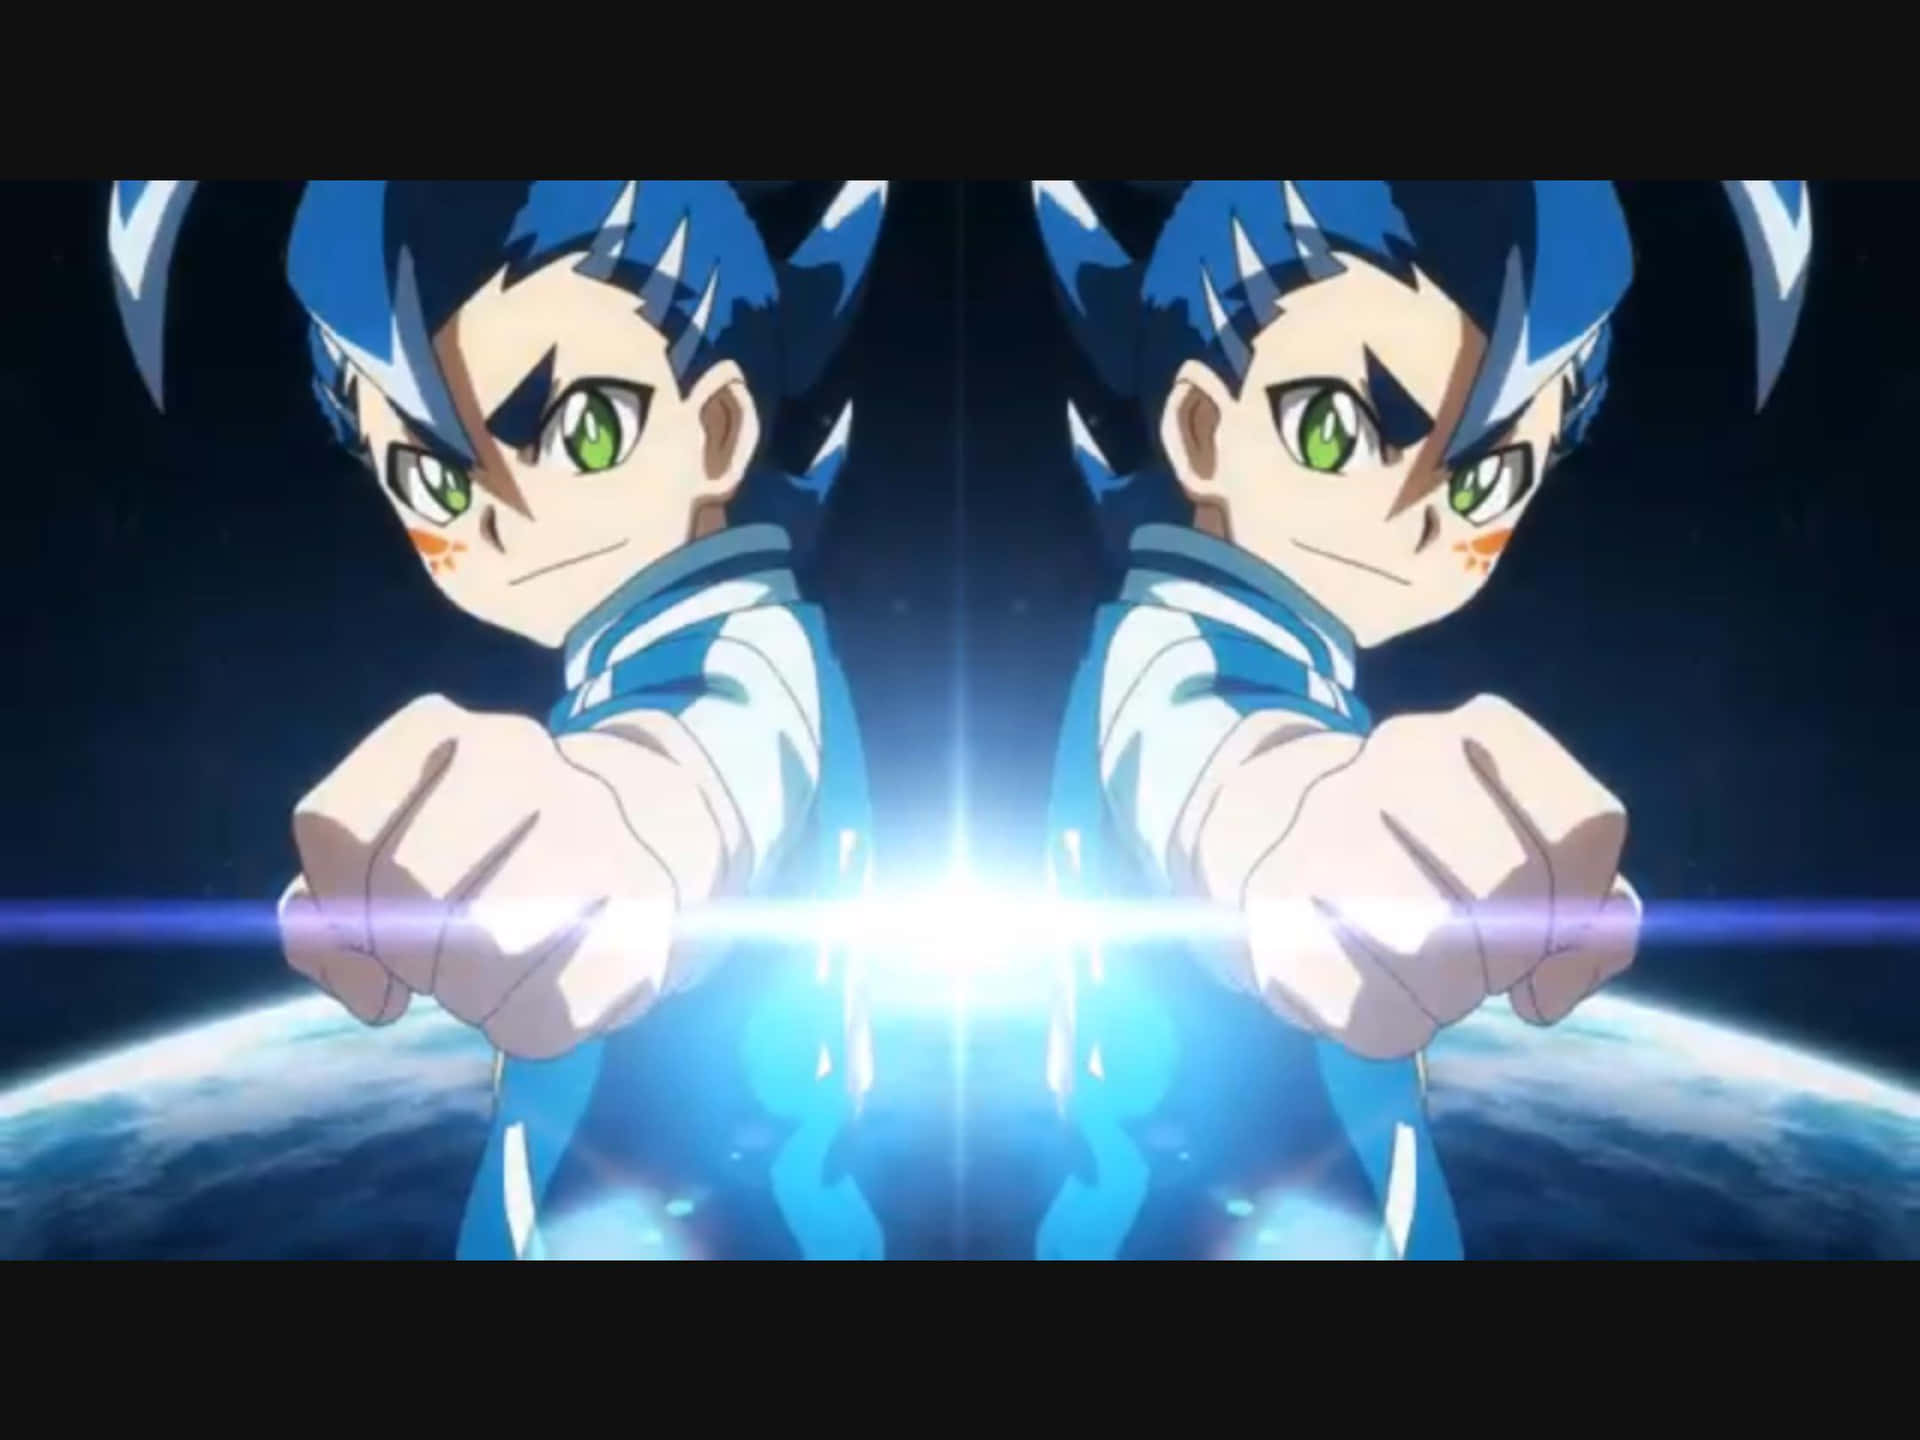 Two Anime Characters With Blue Eyes And A Fist